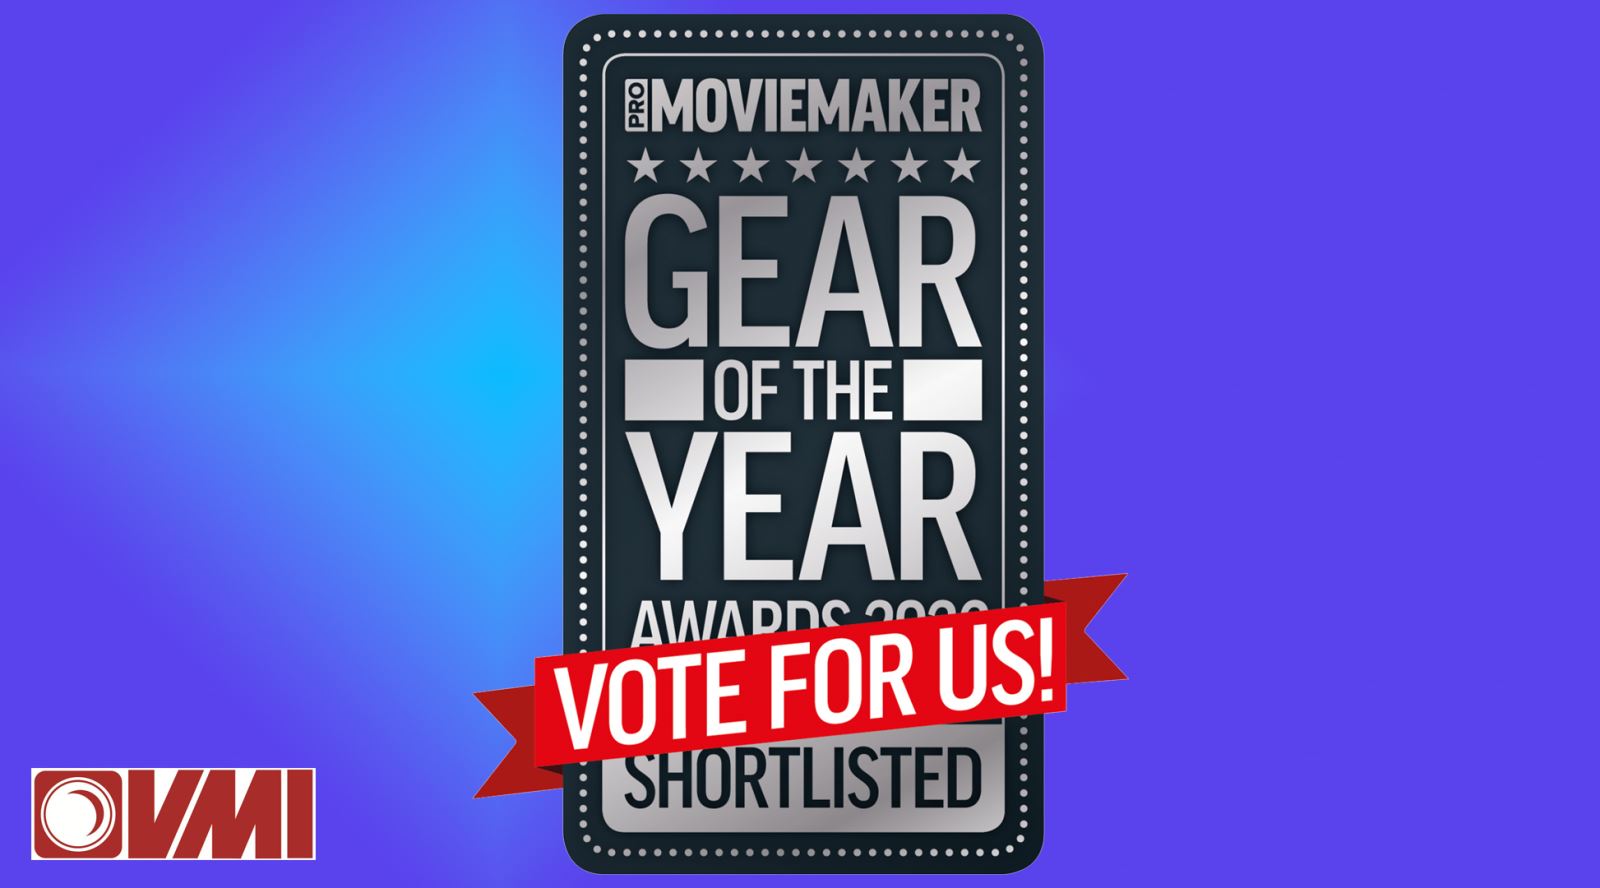 VMI shortlisted Best Rental House by Moviemaker Magazine